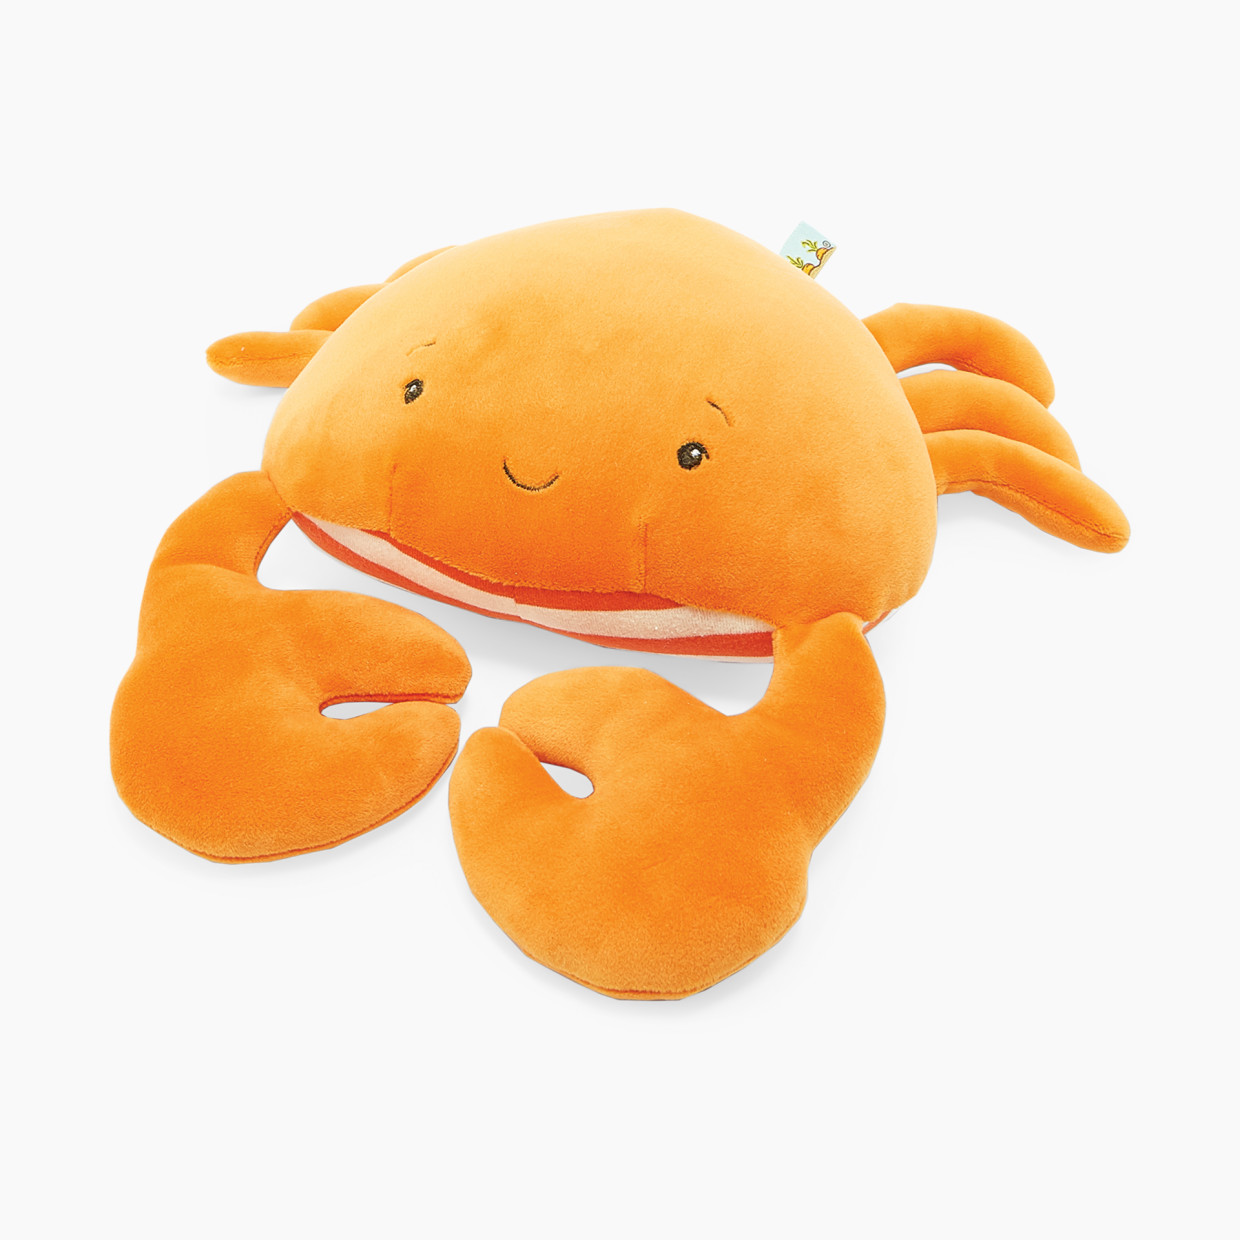 Bunnies By The Bay, Inc. Good Friends By The Bay Stuffed Animal - Happy Crab.